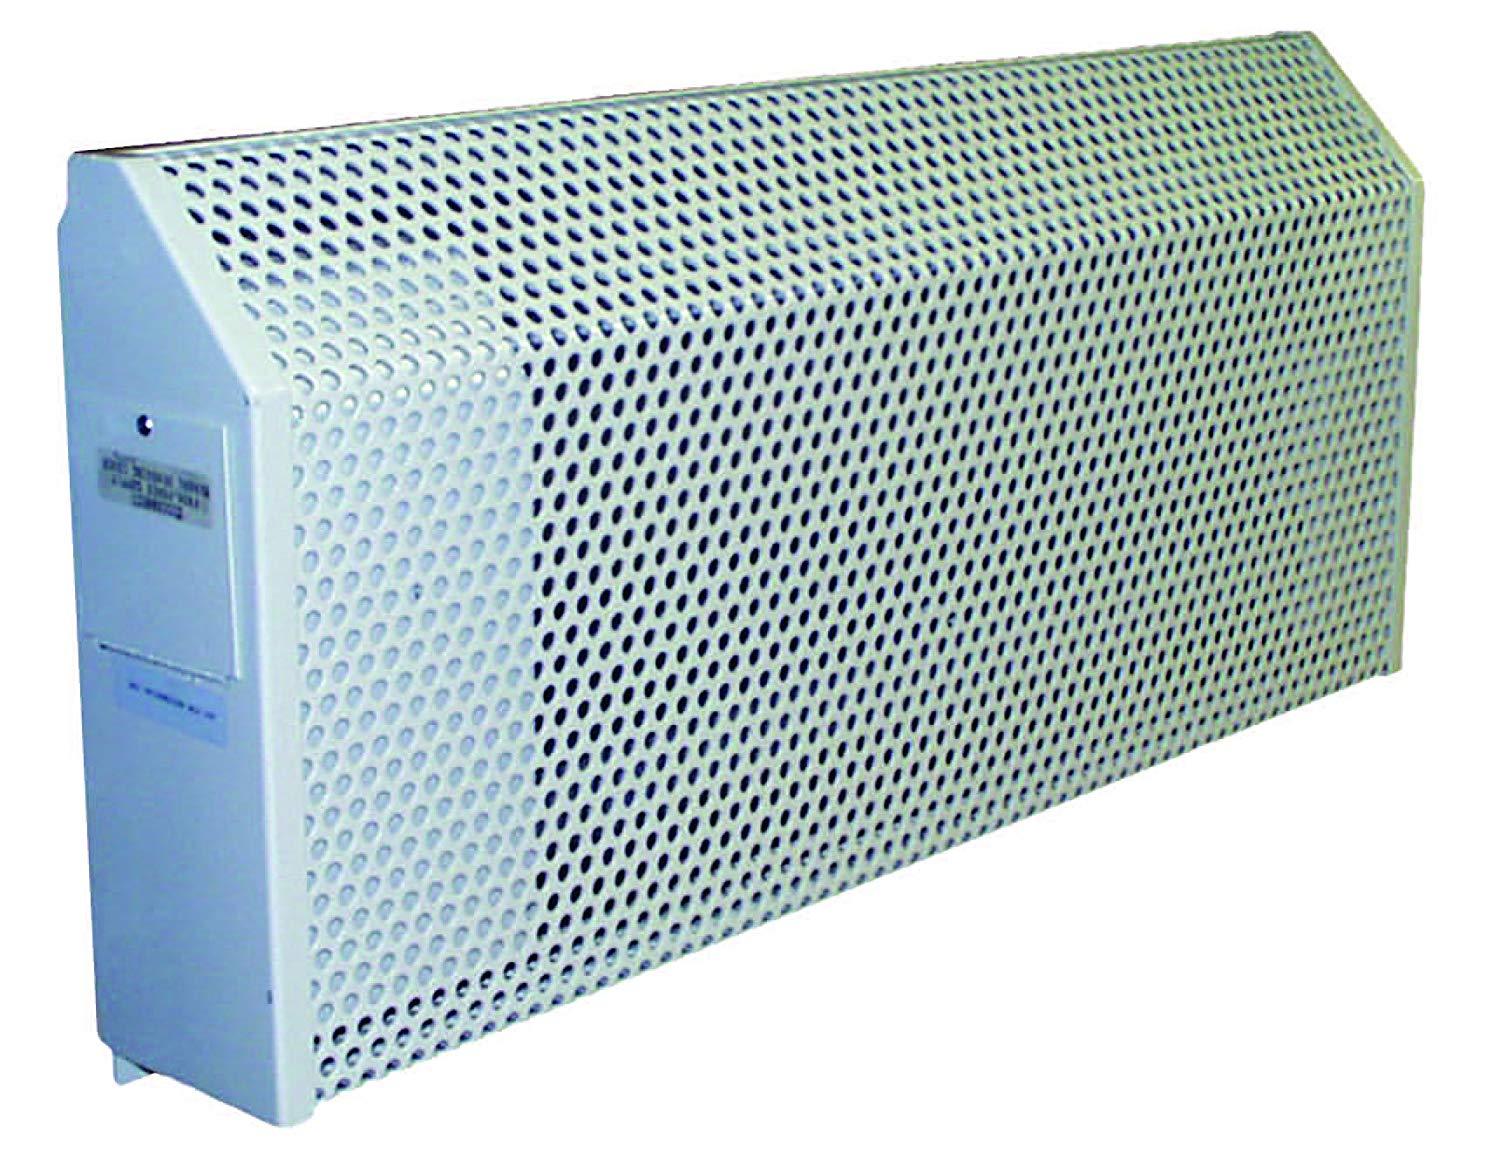 TPI 750W 208V Institutional Wall Convector - F8802075